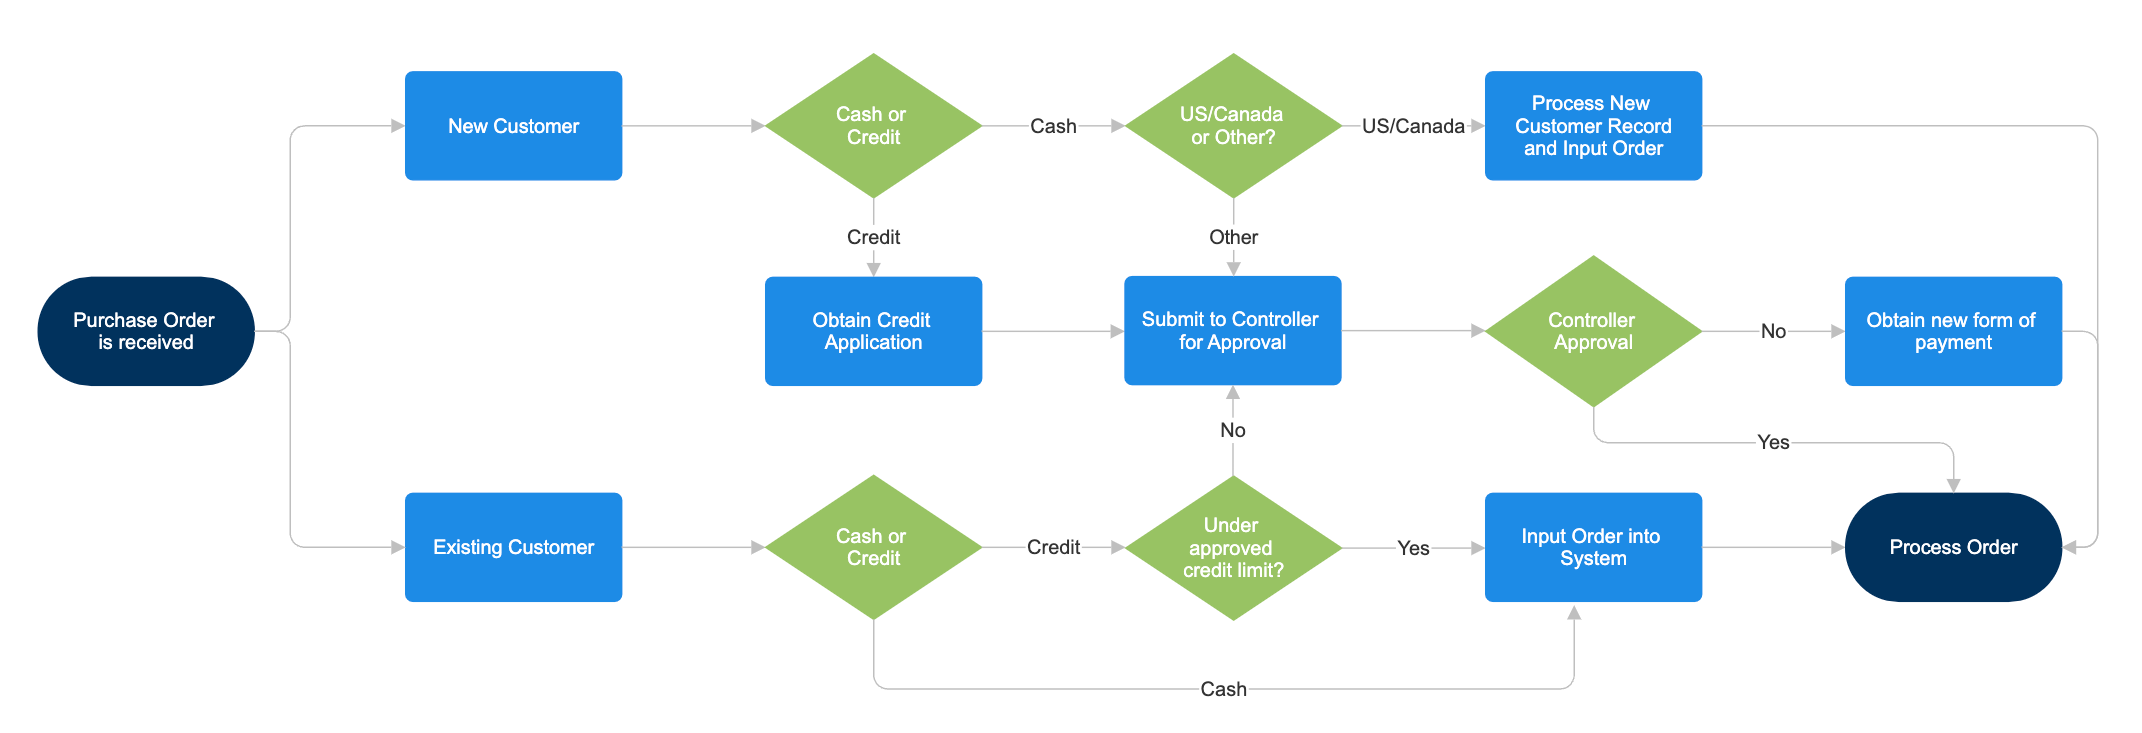 Purchase Order Flow Chart